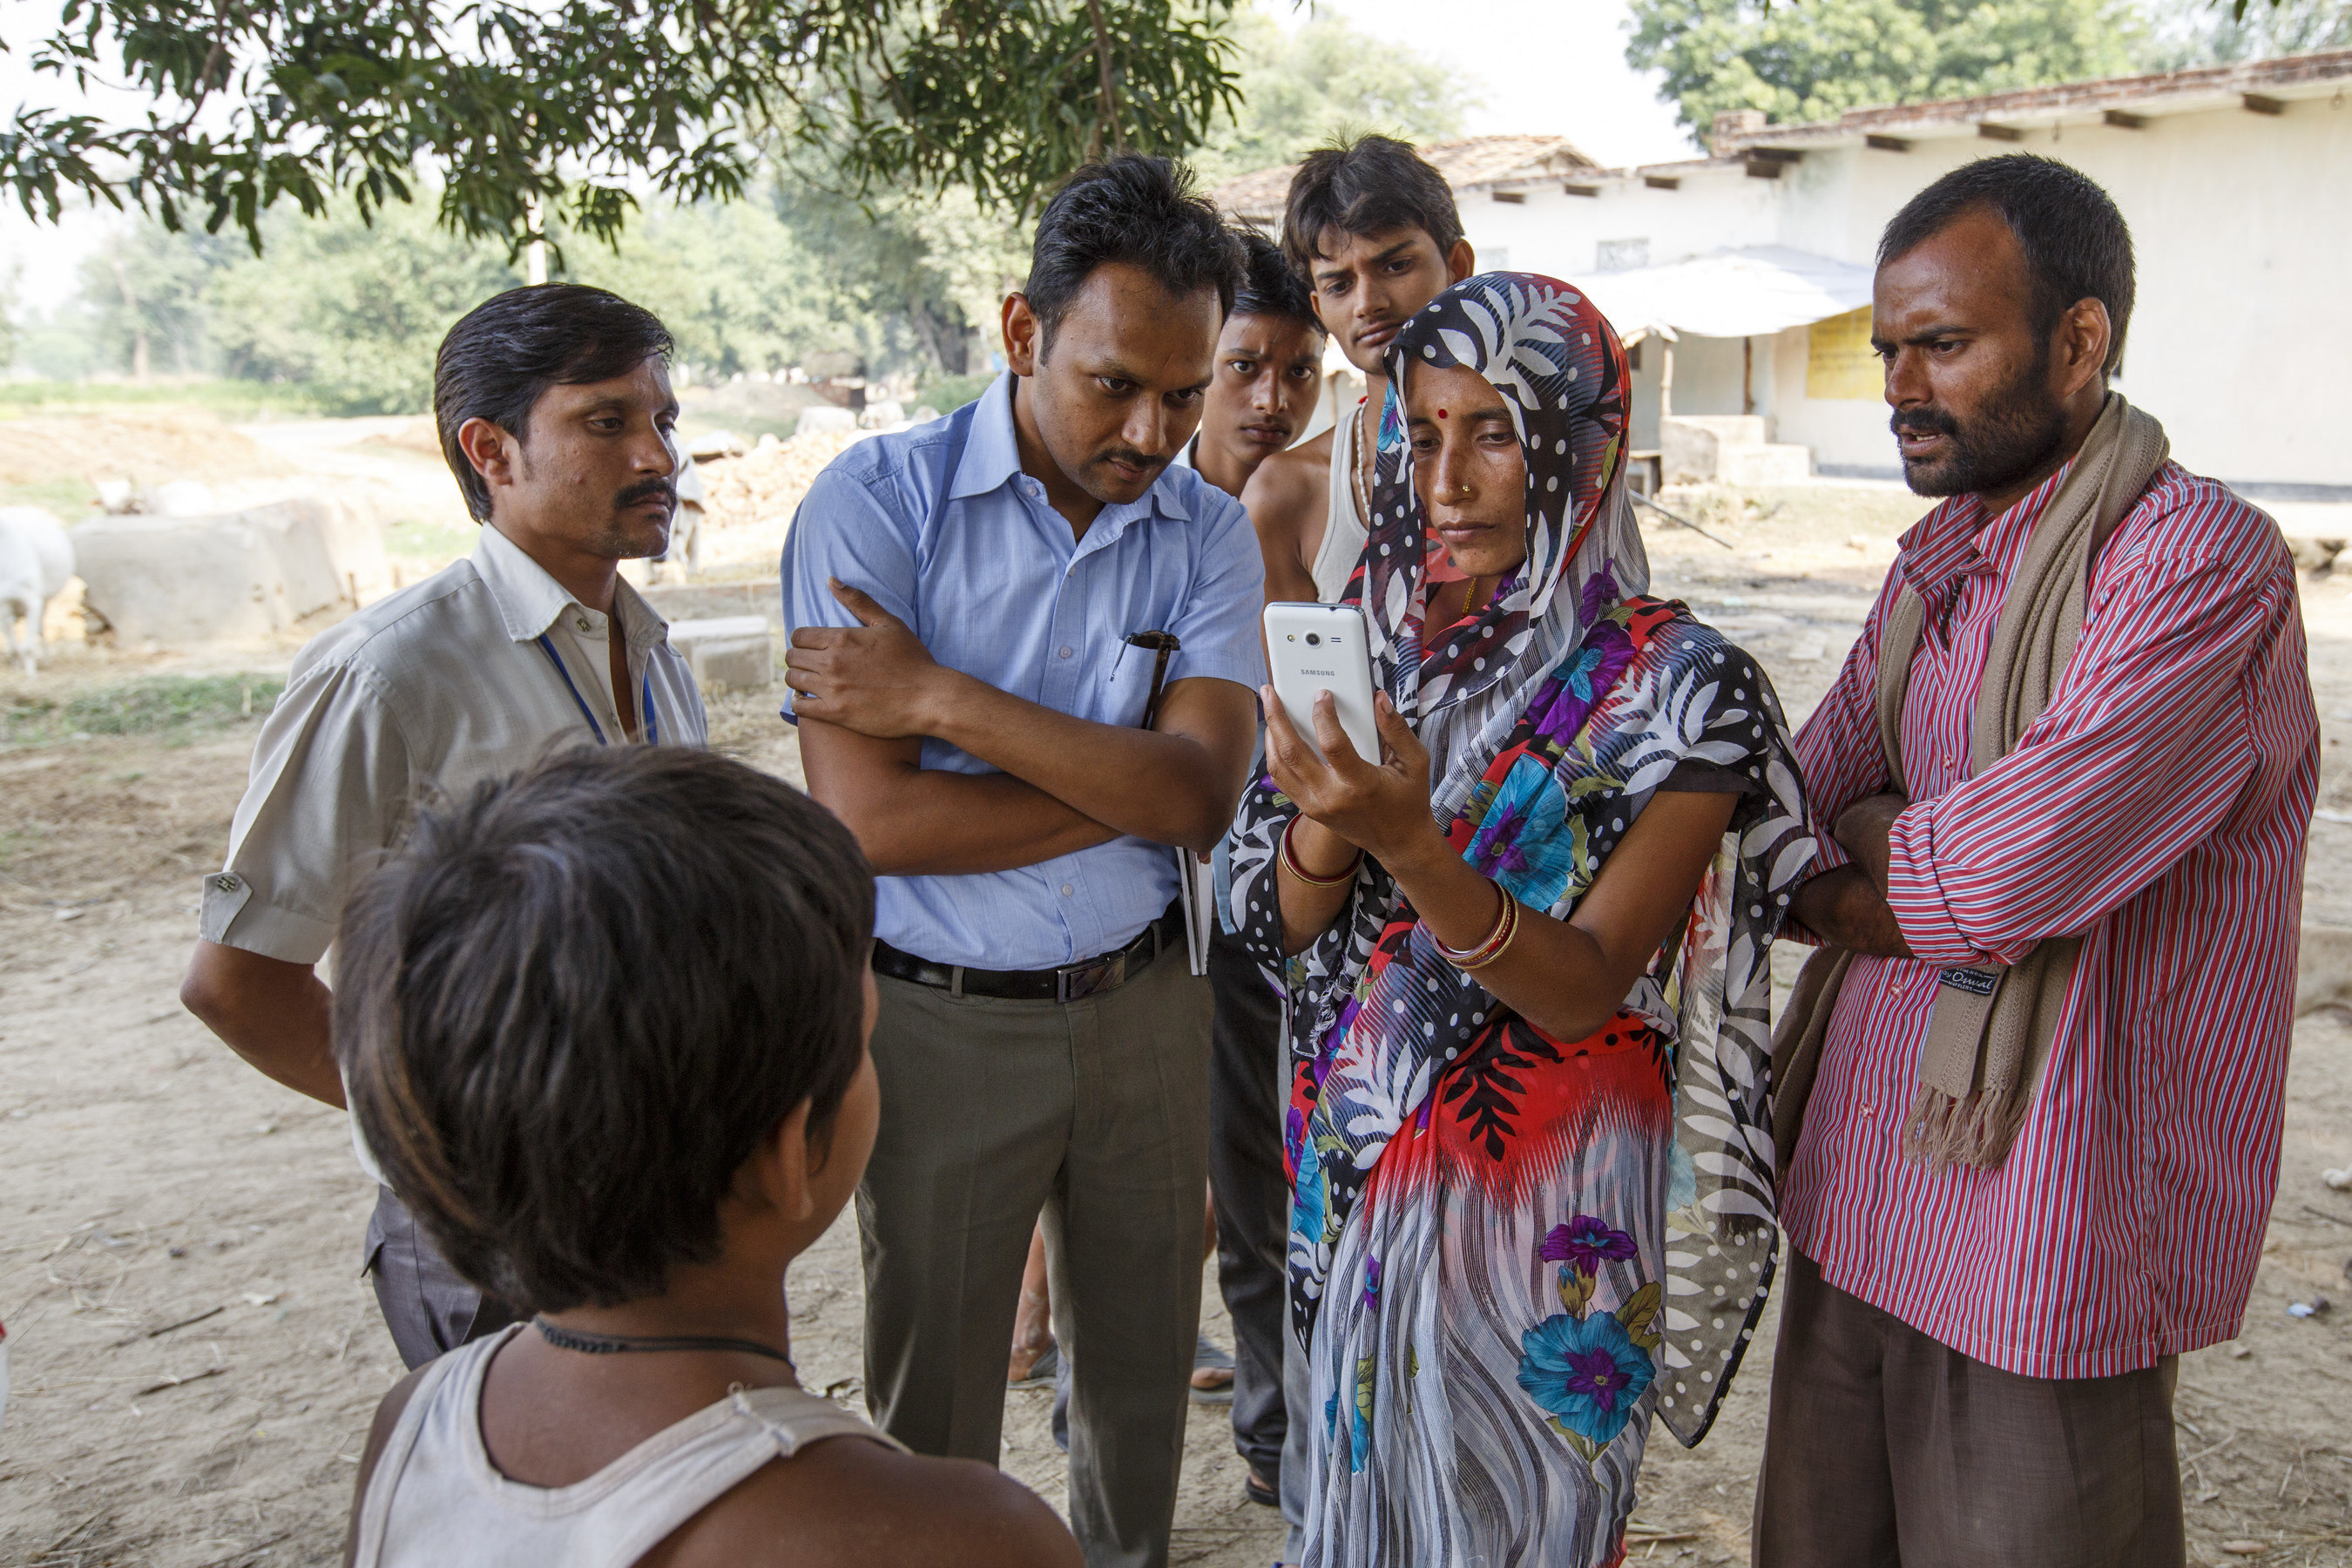 HelpMeSee staff and partners train a community health worker on the GIS-GPS app near Chitrakoot, India.